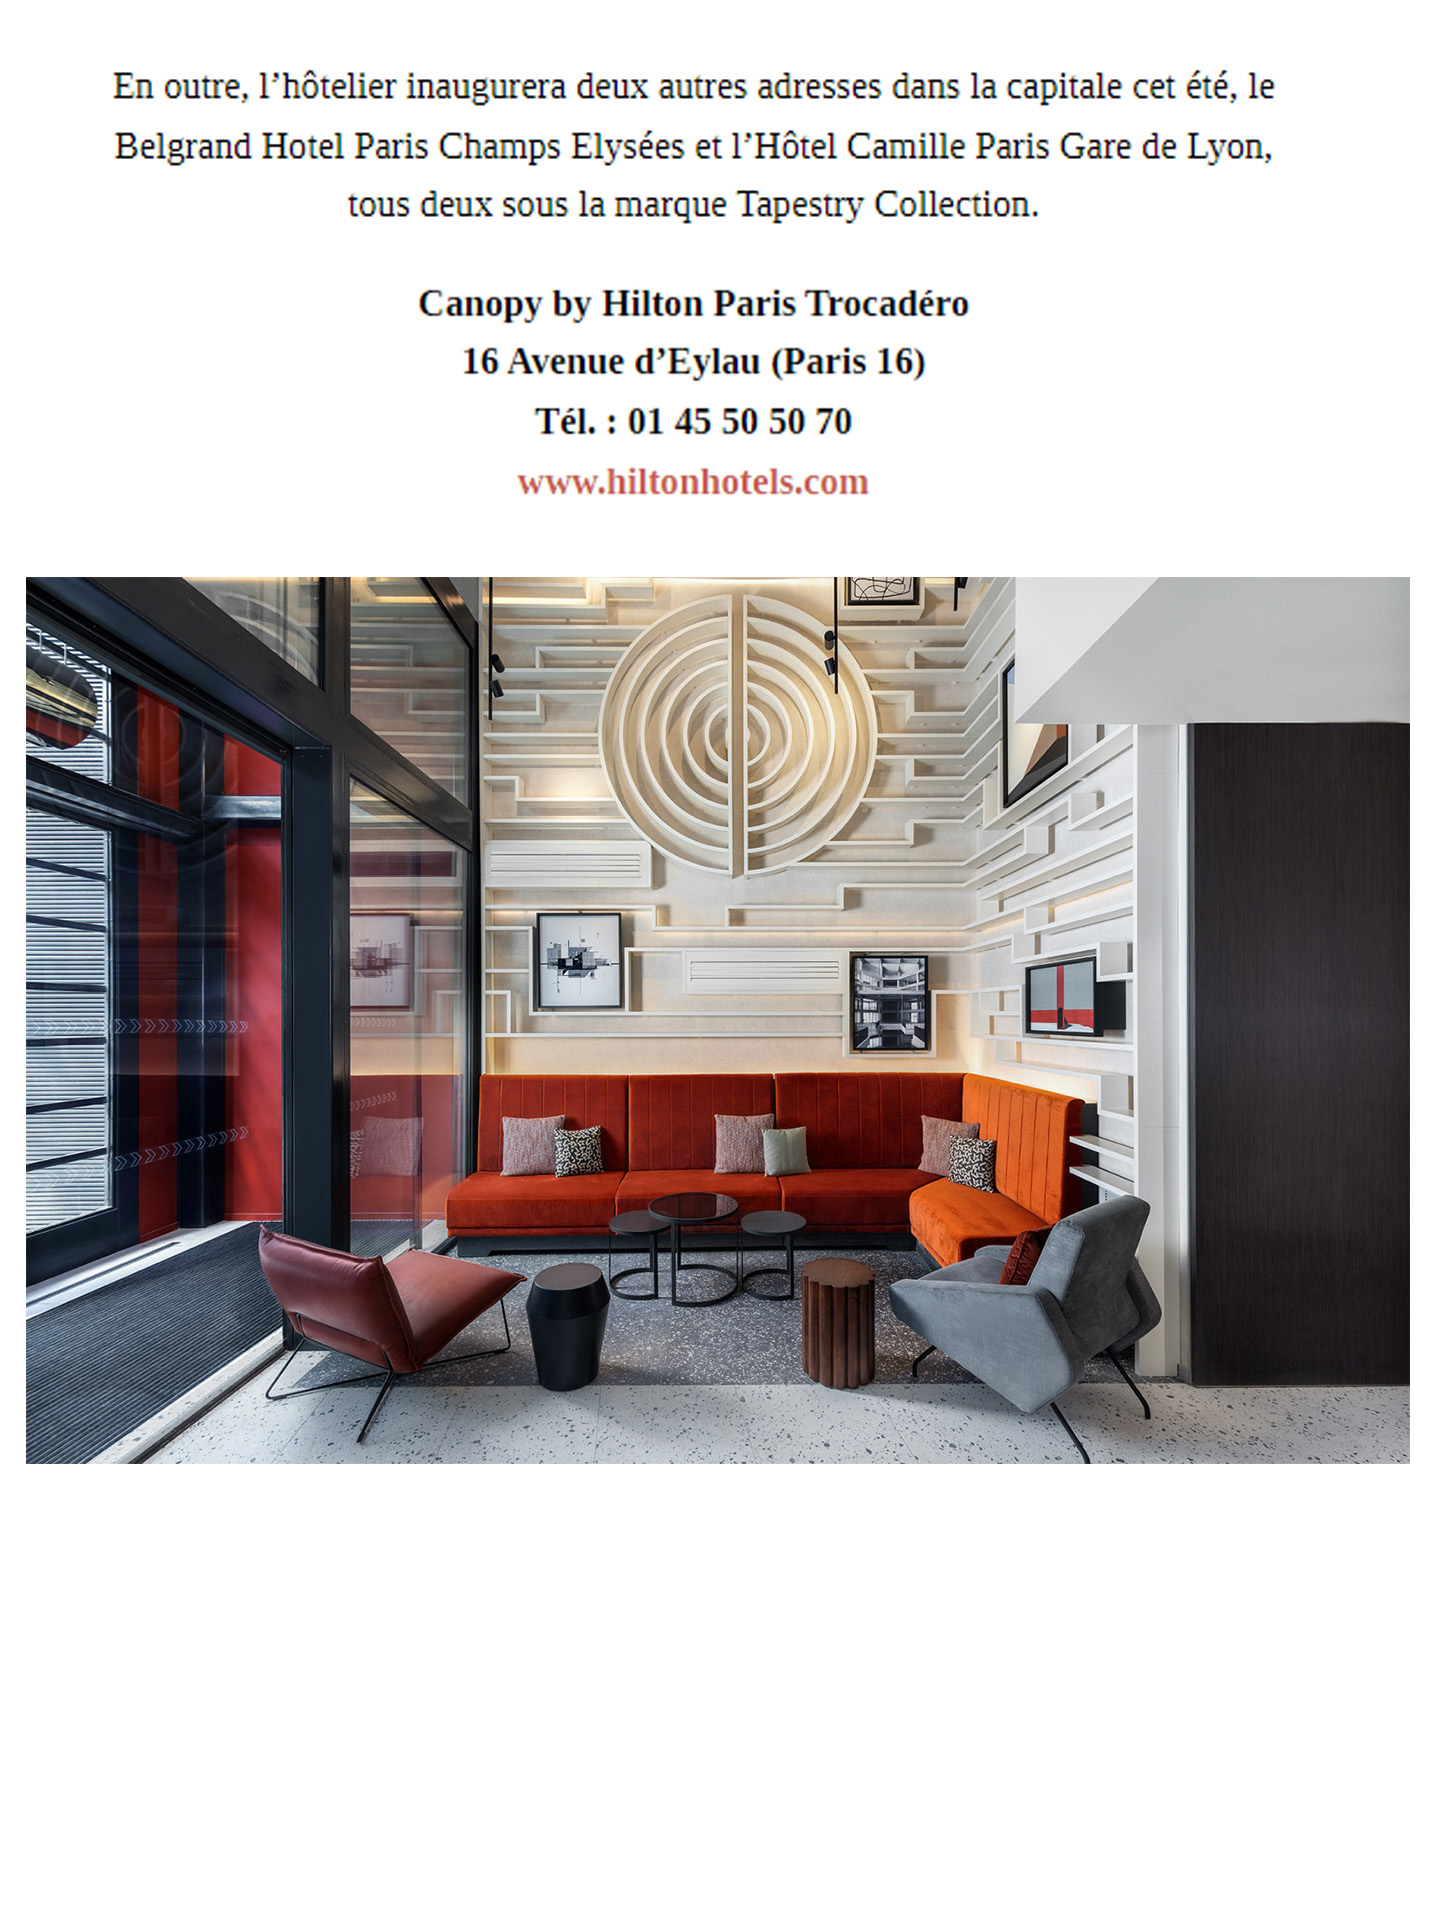 Article on the Canopy by Hilton Paris Trocadero designed by jean-Philippe Nuel studio in the good life magazine, new lifestyle hotel, luxury interior design